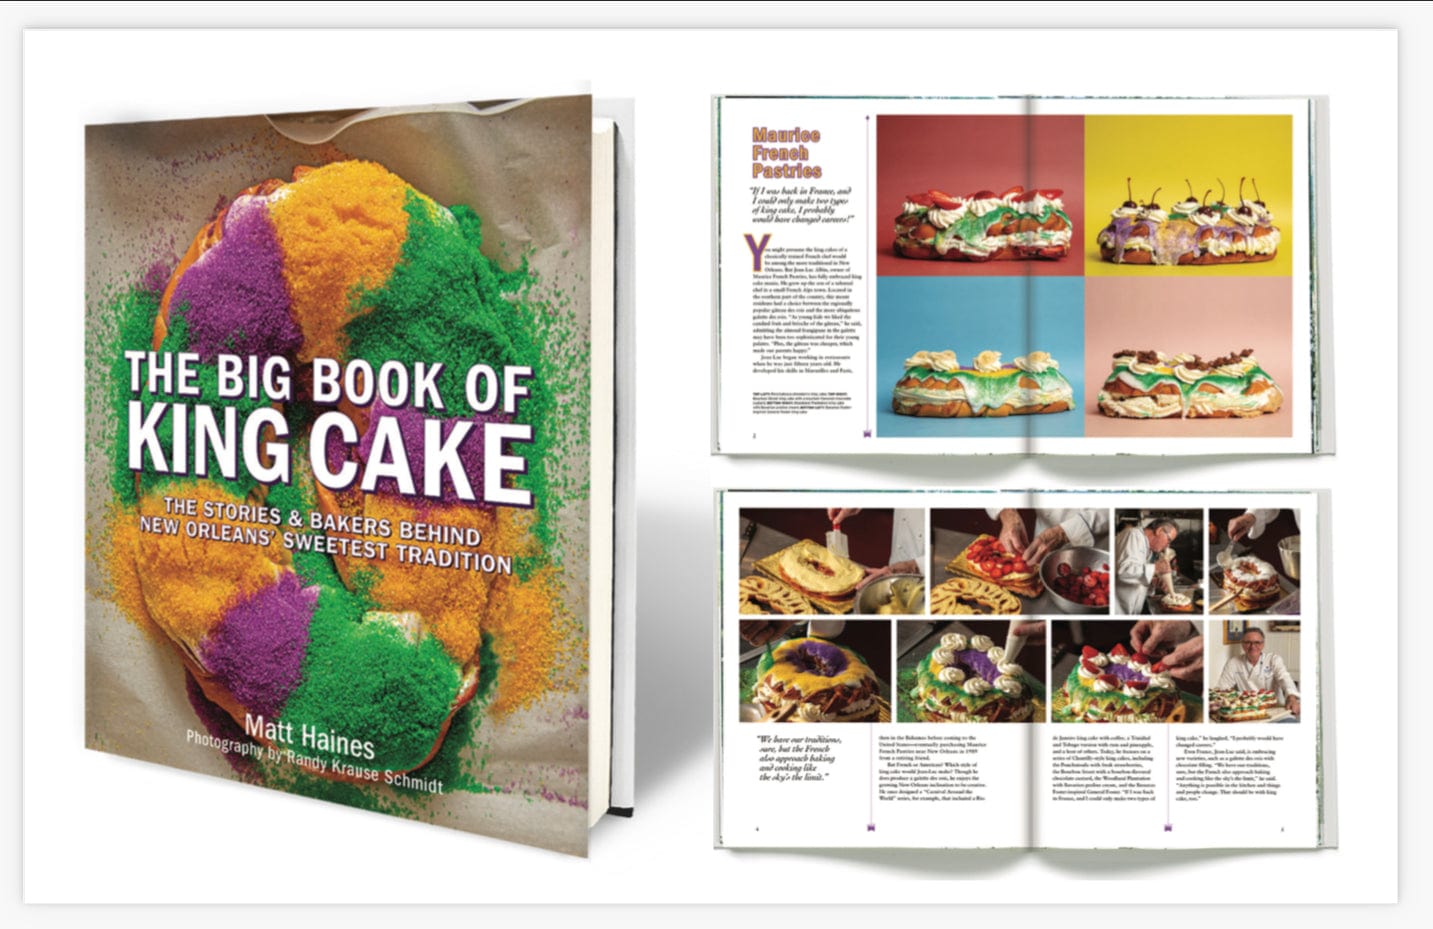 INGRAM PUBLISHER SERVICES The Big Book of King Cake - Little Miss Muffin Children & Home